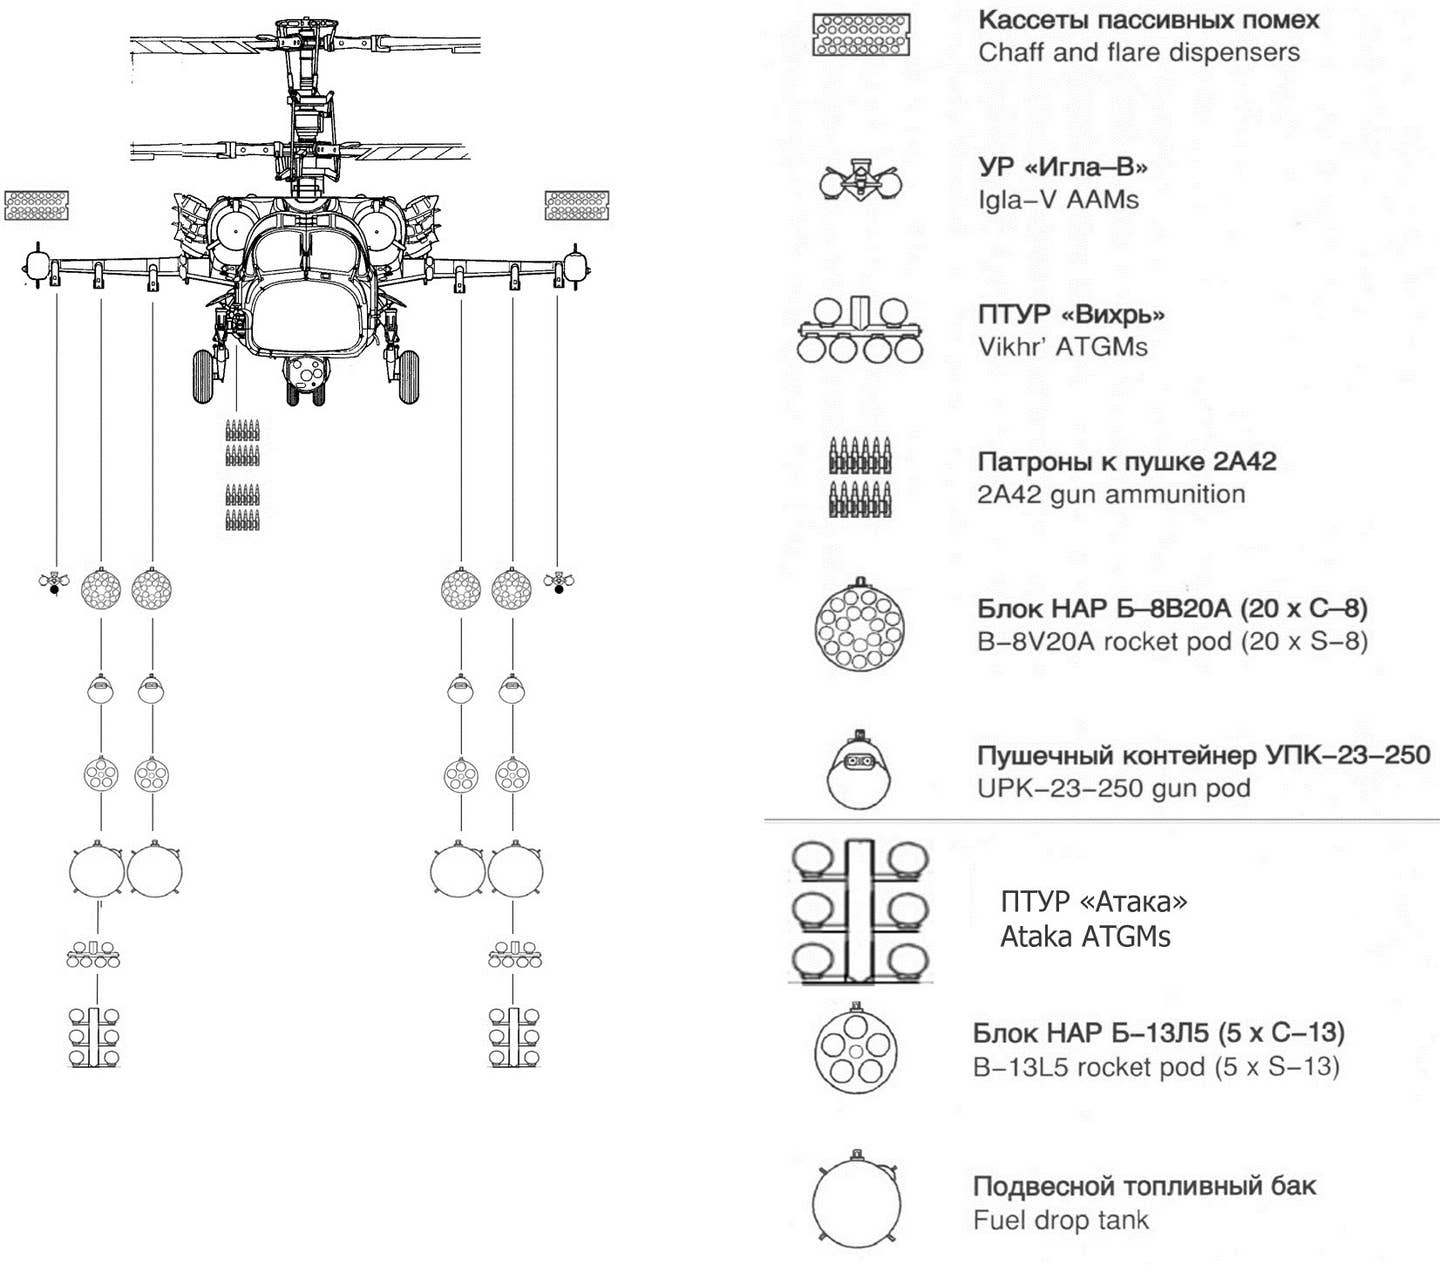 An armament diagram shows the weapons the Ka-52 can carry. Those last two diagrams under the center hardpoints of each wing are the missile racks. The helicopter can carry up to six anti-tank missiles from each of the two center hardpoints for a total of 12.<br>(KPoJluK2008, CC BY-SA 3.0)